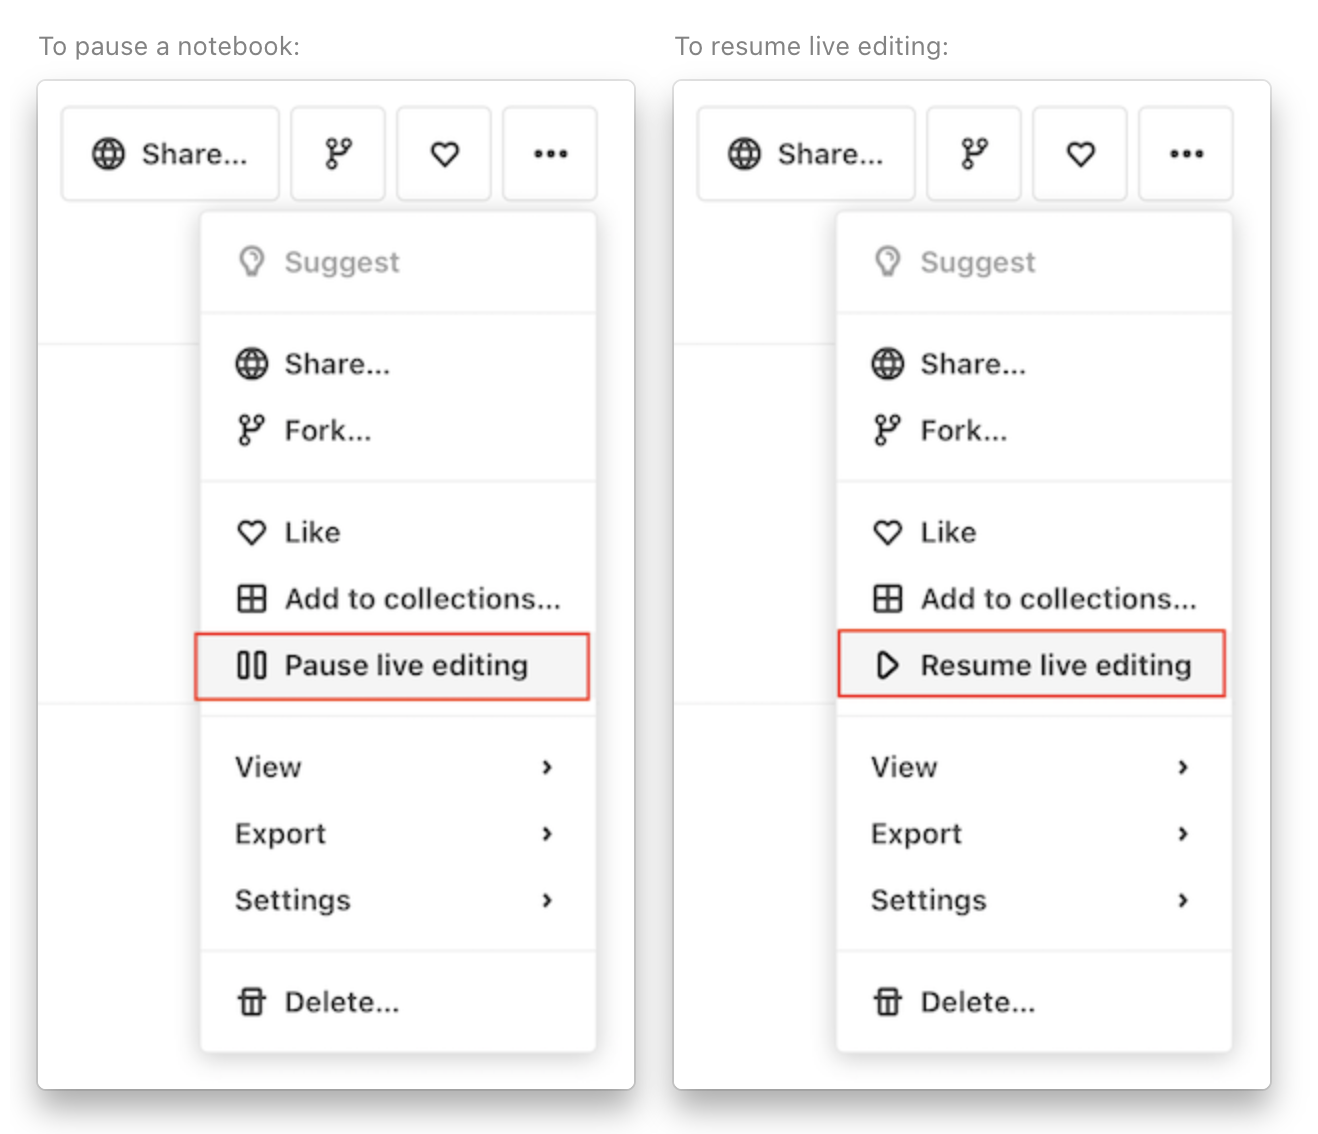 Side-by-side screenshots showing the different options that users will see whether in a live notebook (where a Pause live editing option is visible) or a paused notebook (where a Resume live editing option is visible).